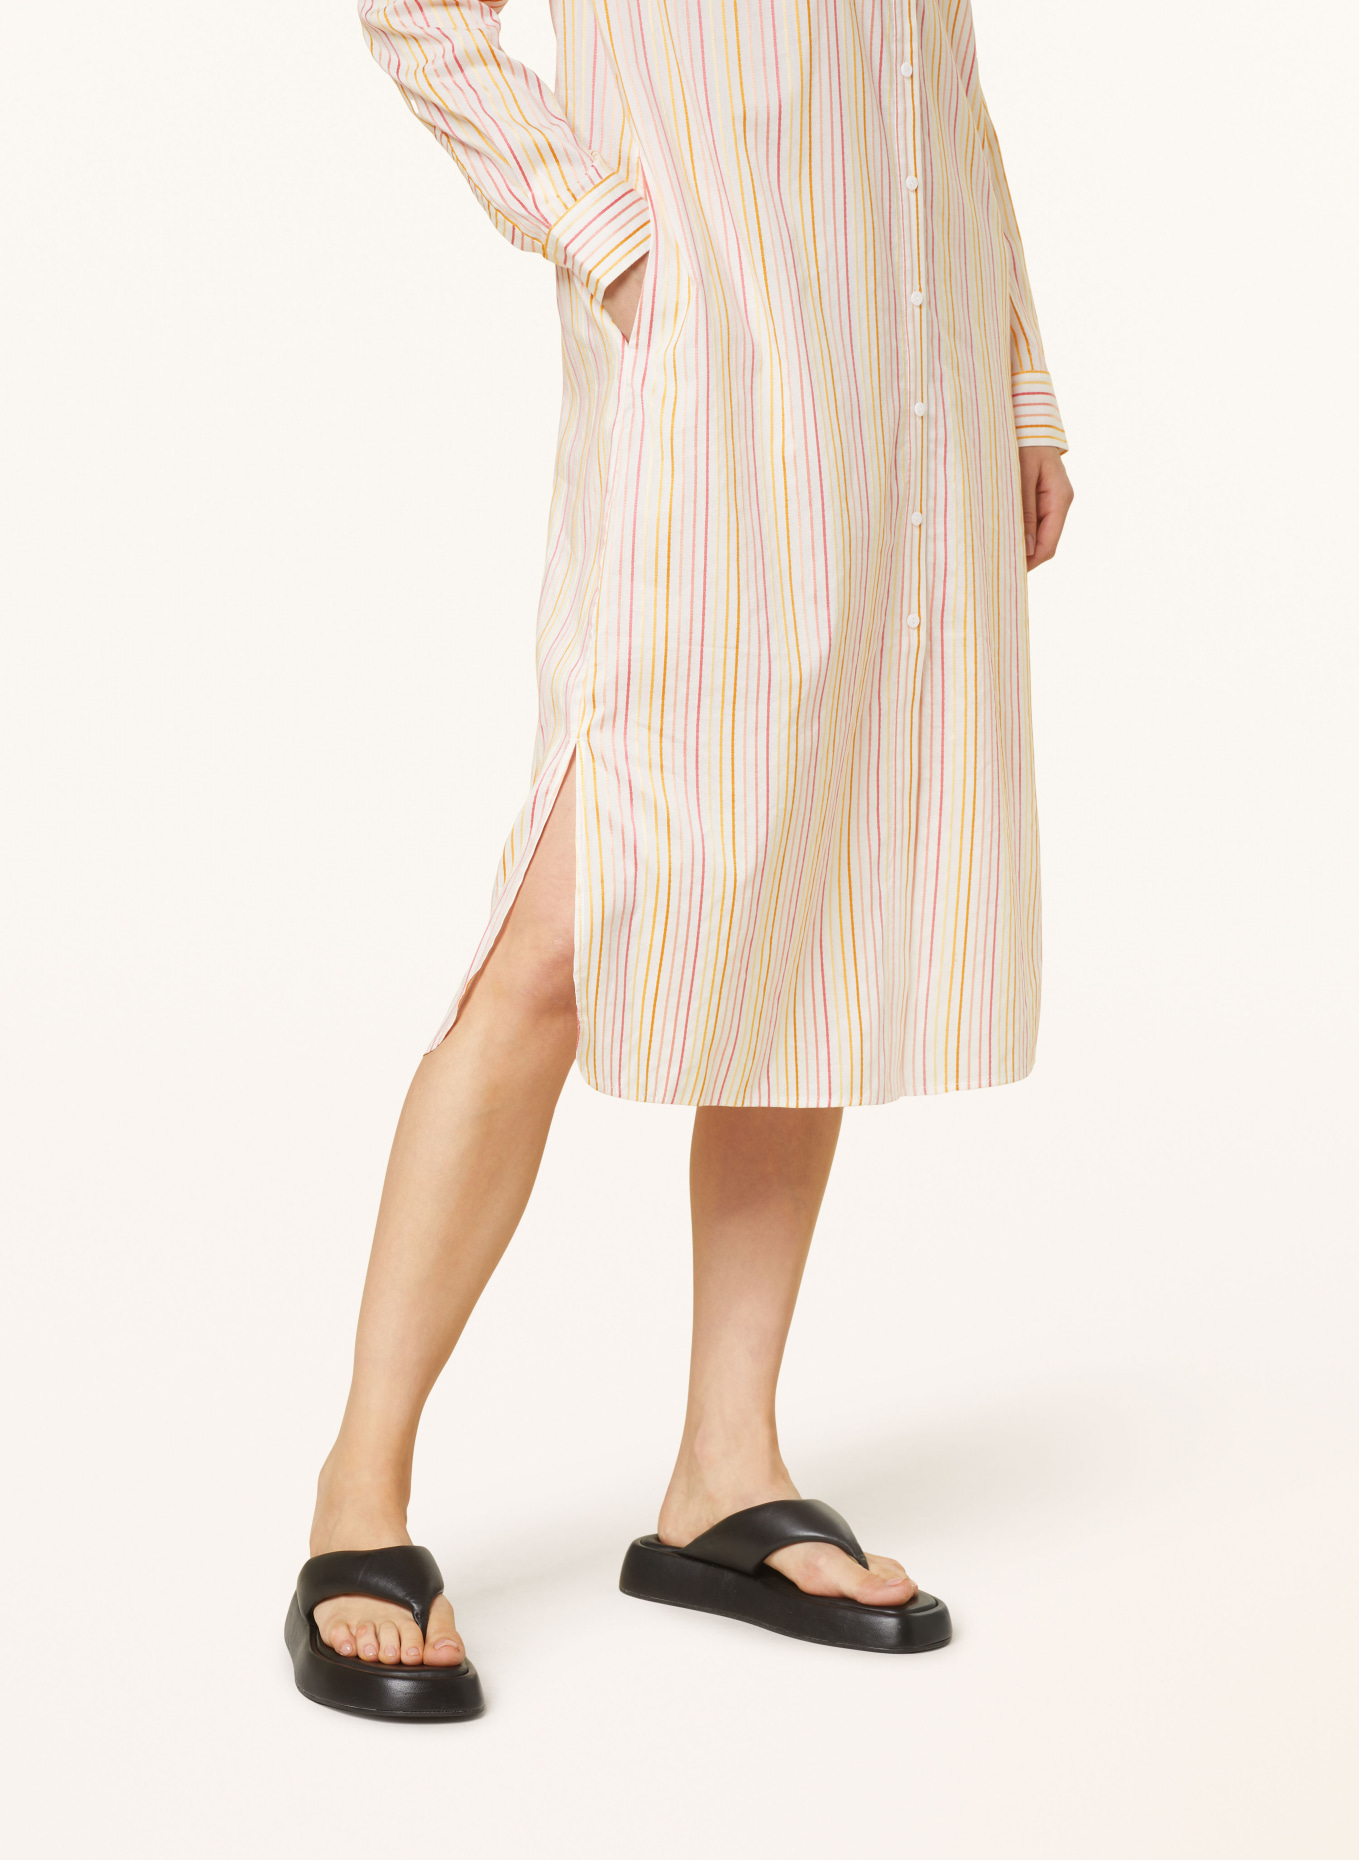 Lala Berlin Shirt dress DUNE, Color: WHITE/ RED/ YELLOW (Image 5)